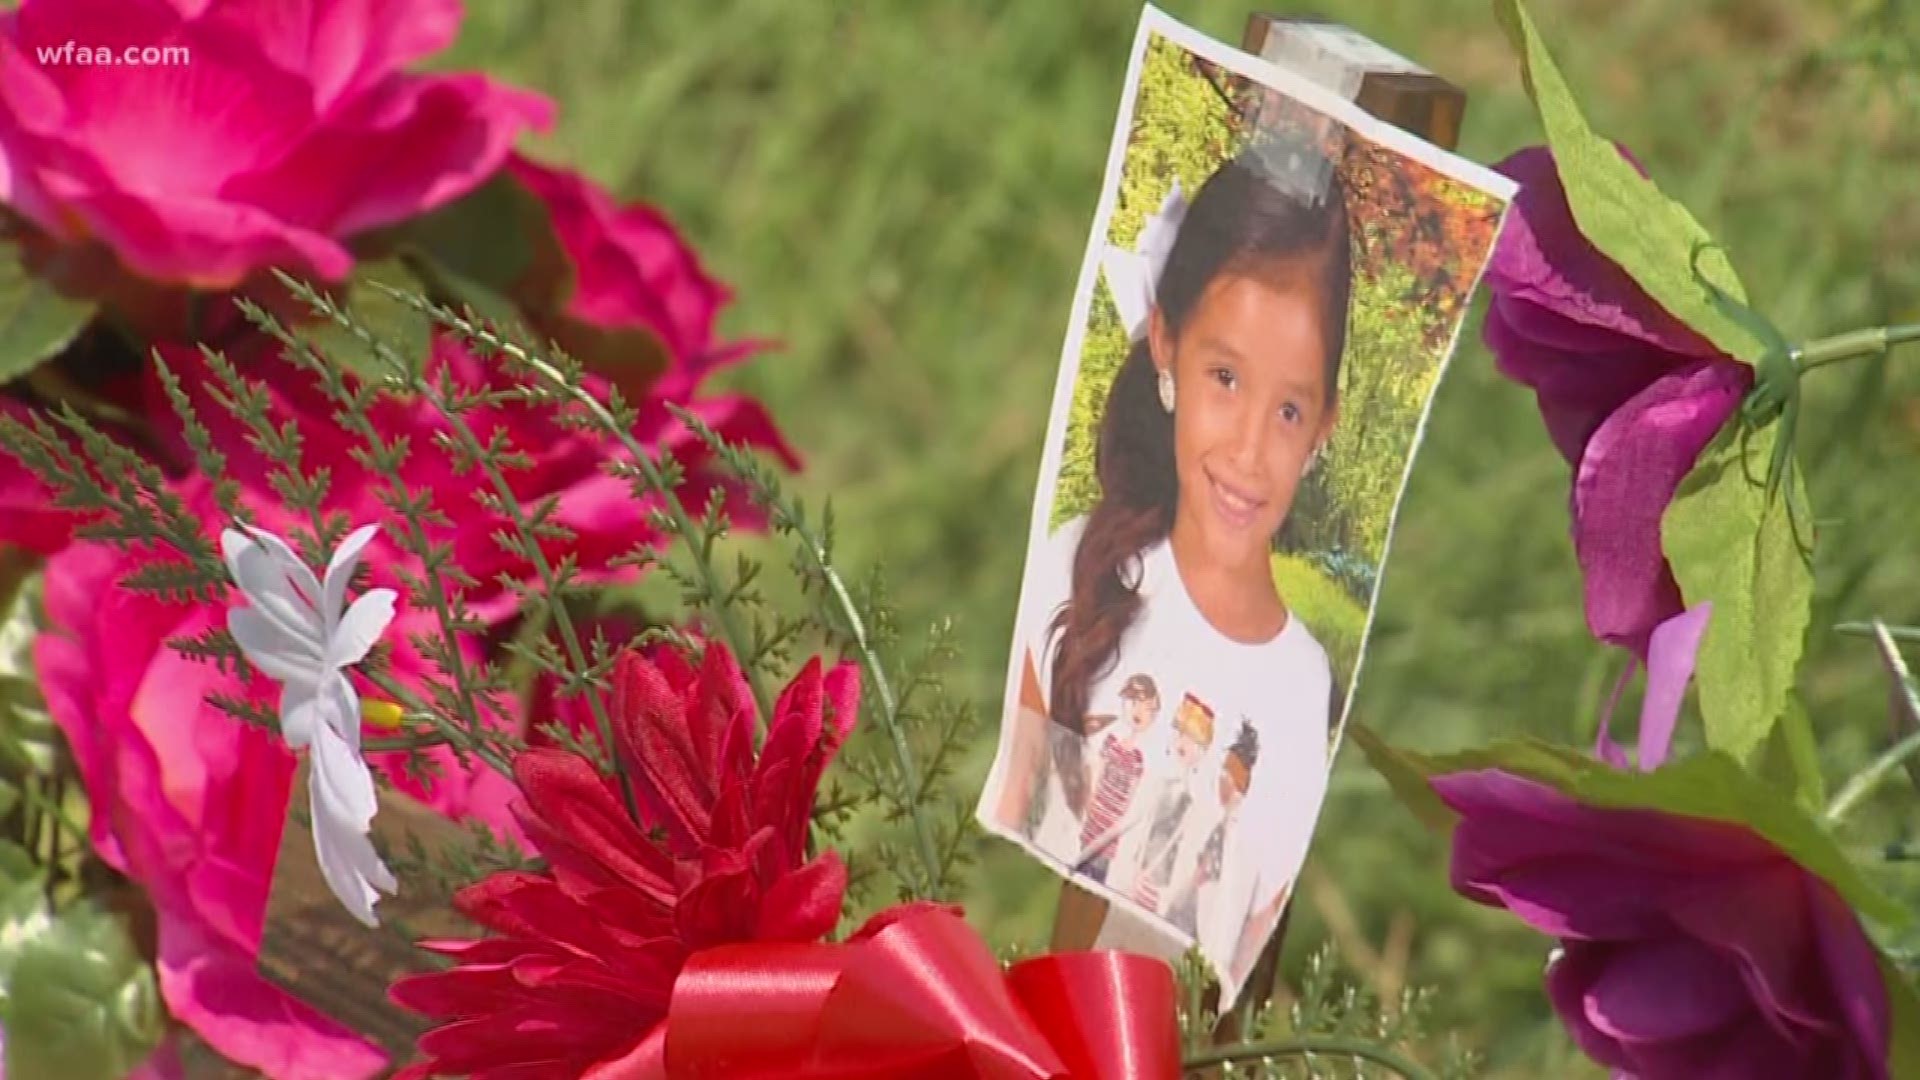 Three people were arrested after street racing in Dallas led to a collision that killed a 9-year-old girl and left another child in critical condition.